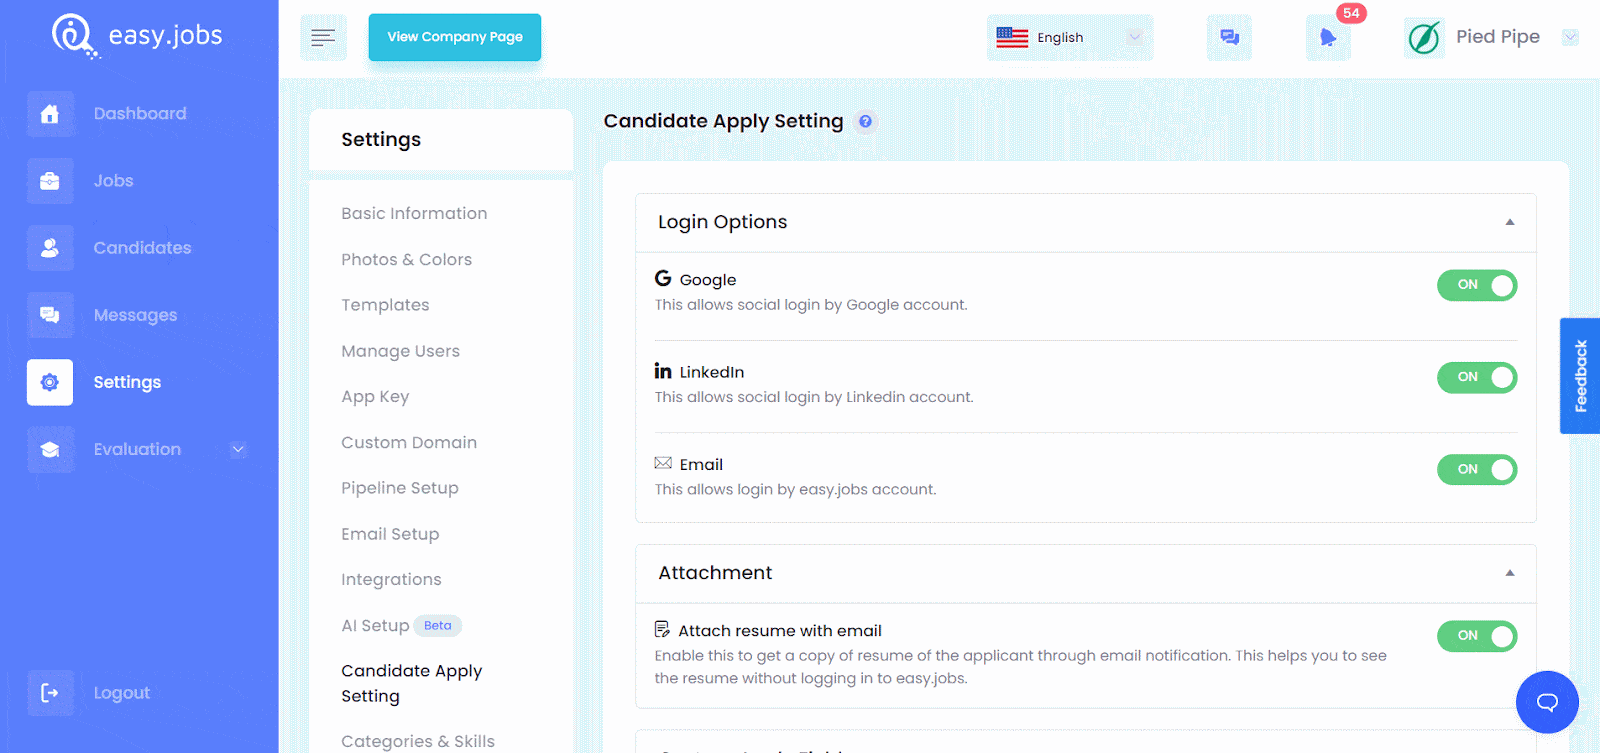 Candidate Apply Settings 3